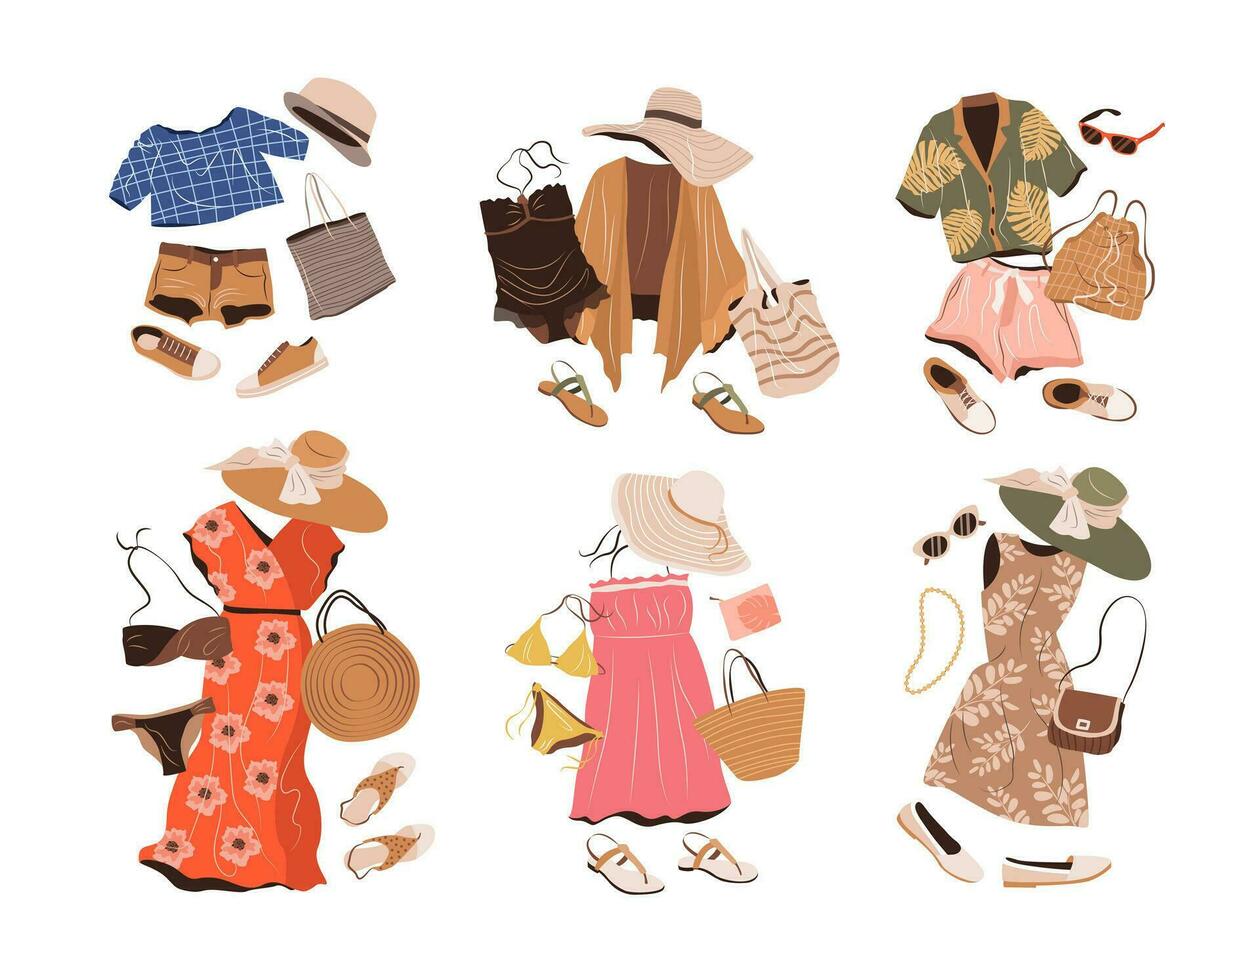 Outfits set in casual style for women. Fashion clothing, accessories, shoes for spring, summer and vacation. isolated flat vector illustrations on background